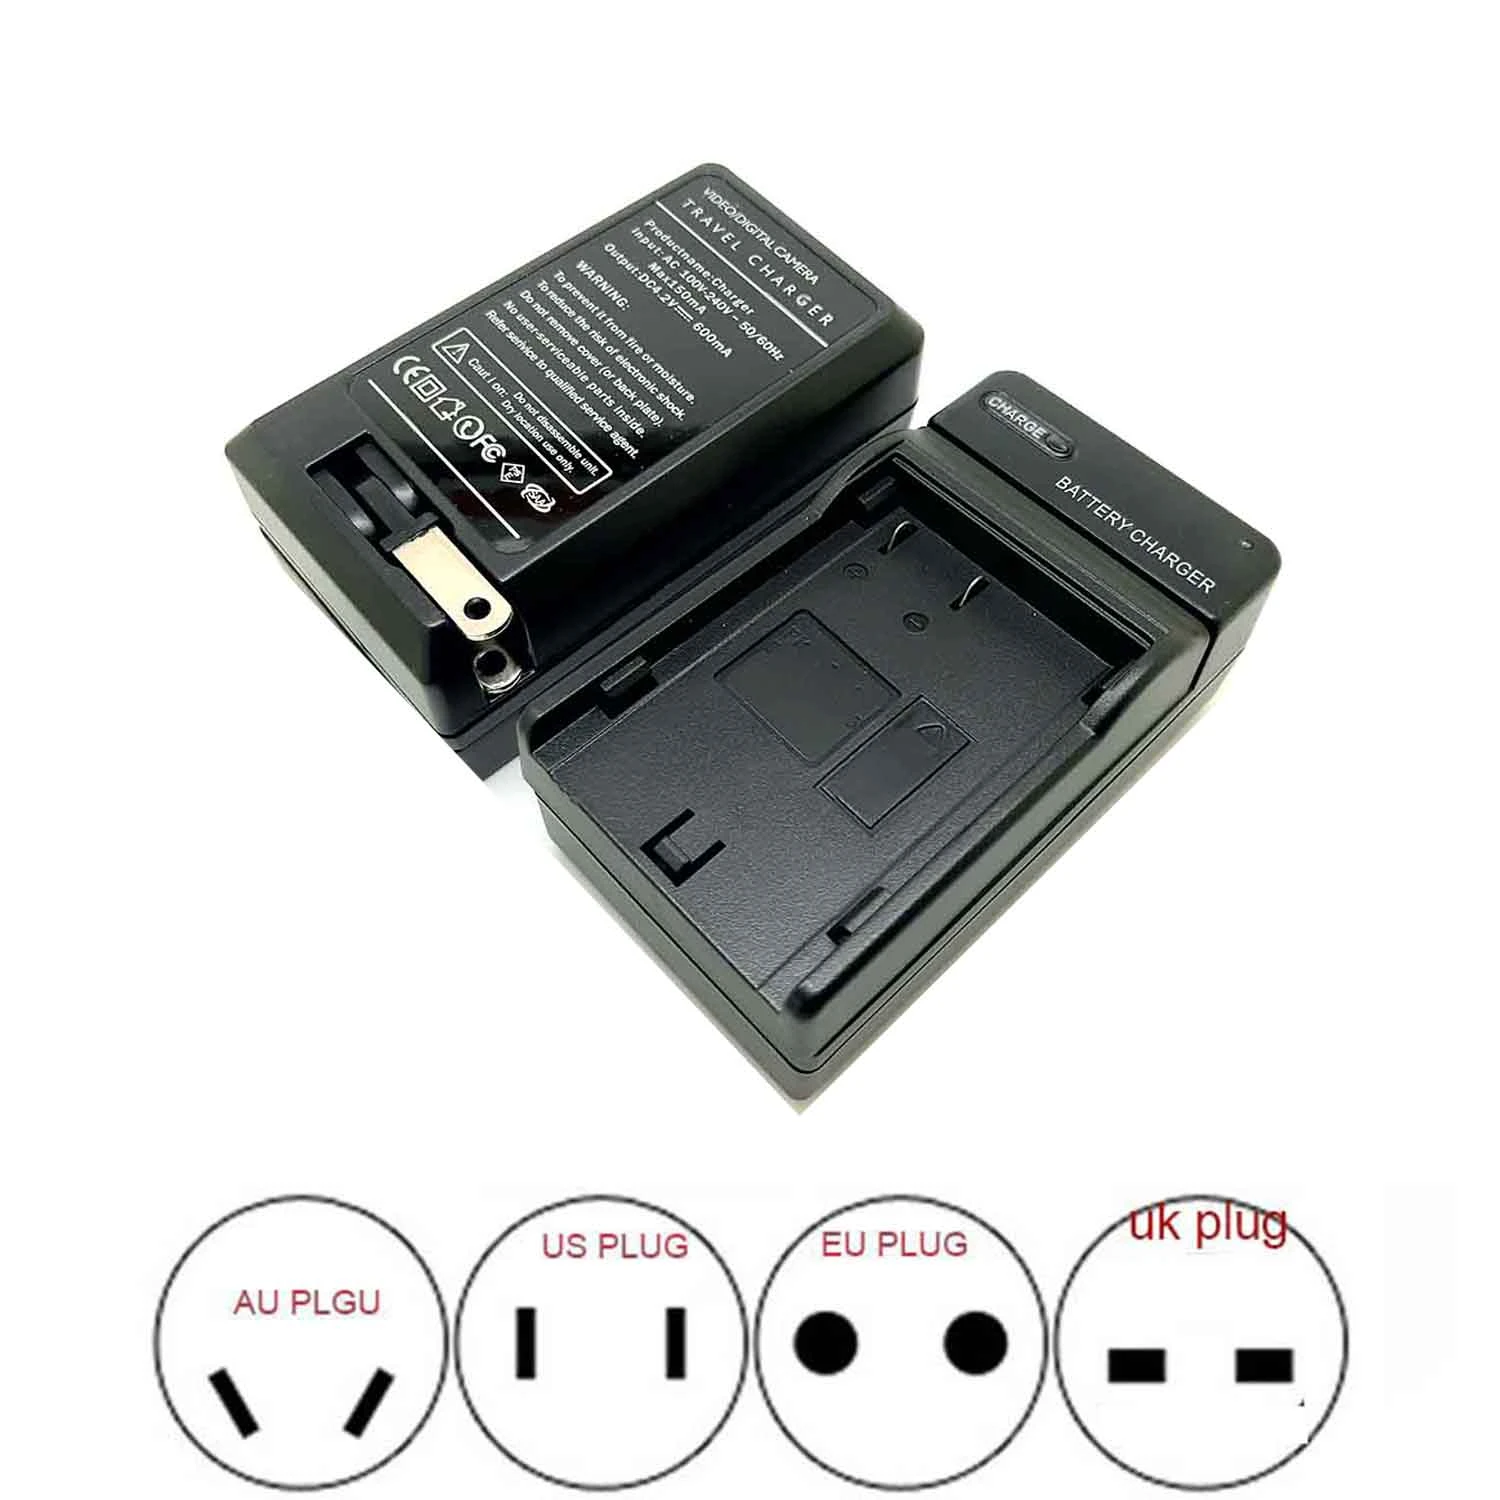 Battery Charger For Np80 Np-80 Fujifilm Finepix 6800, 6800 Zoom, 6900, 6900  Zoom Camera - Chargers - AliExpress